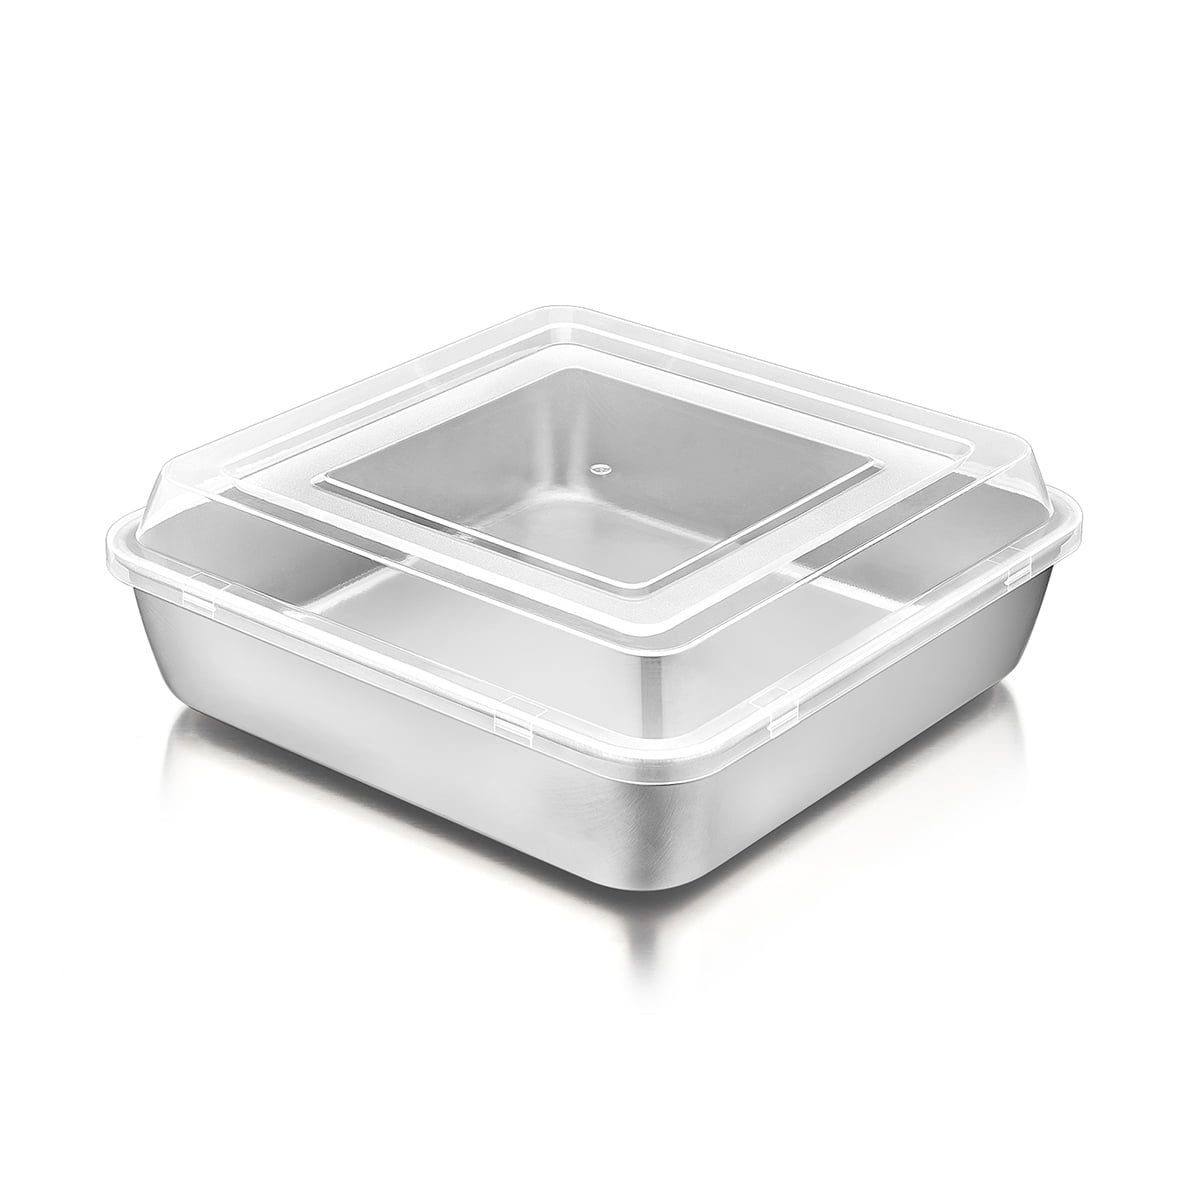 PAMPERED CHEF Aluminized Steel Metal Baking Pan 8X8 Square VGUC